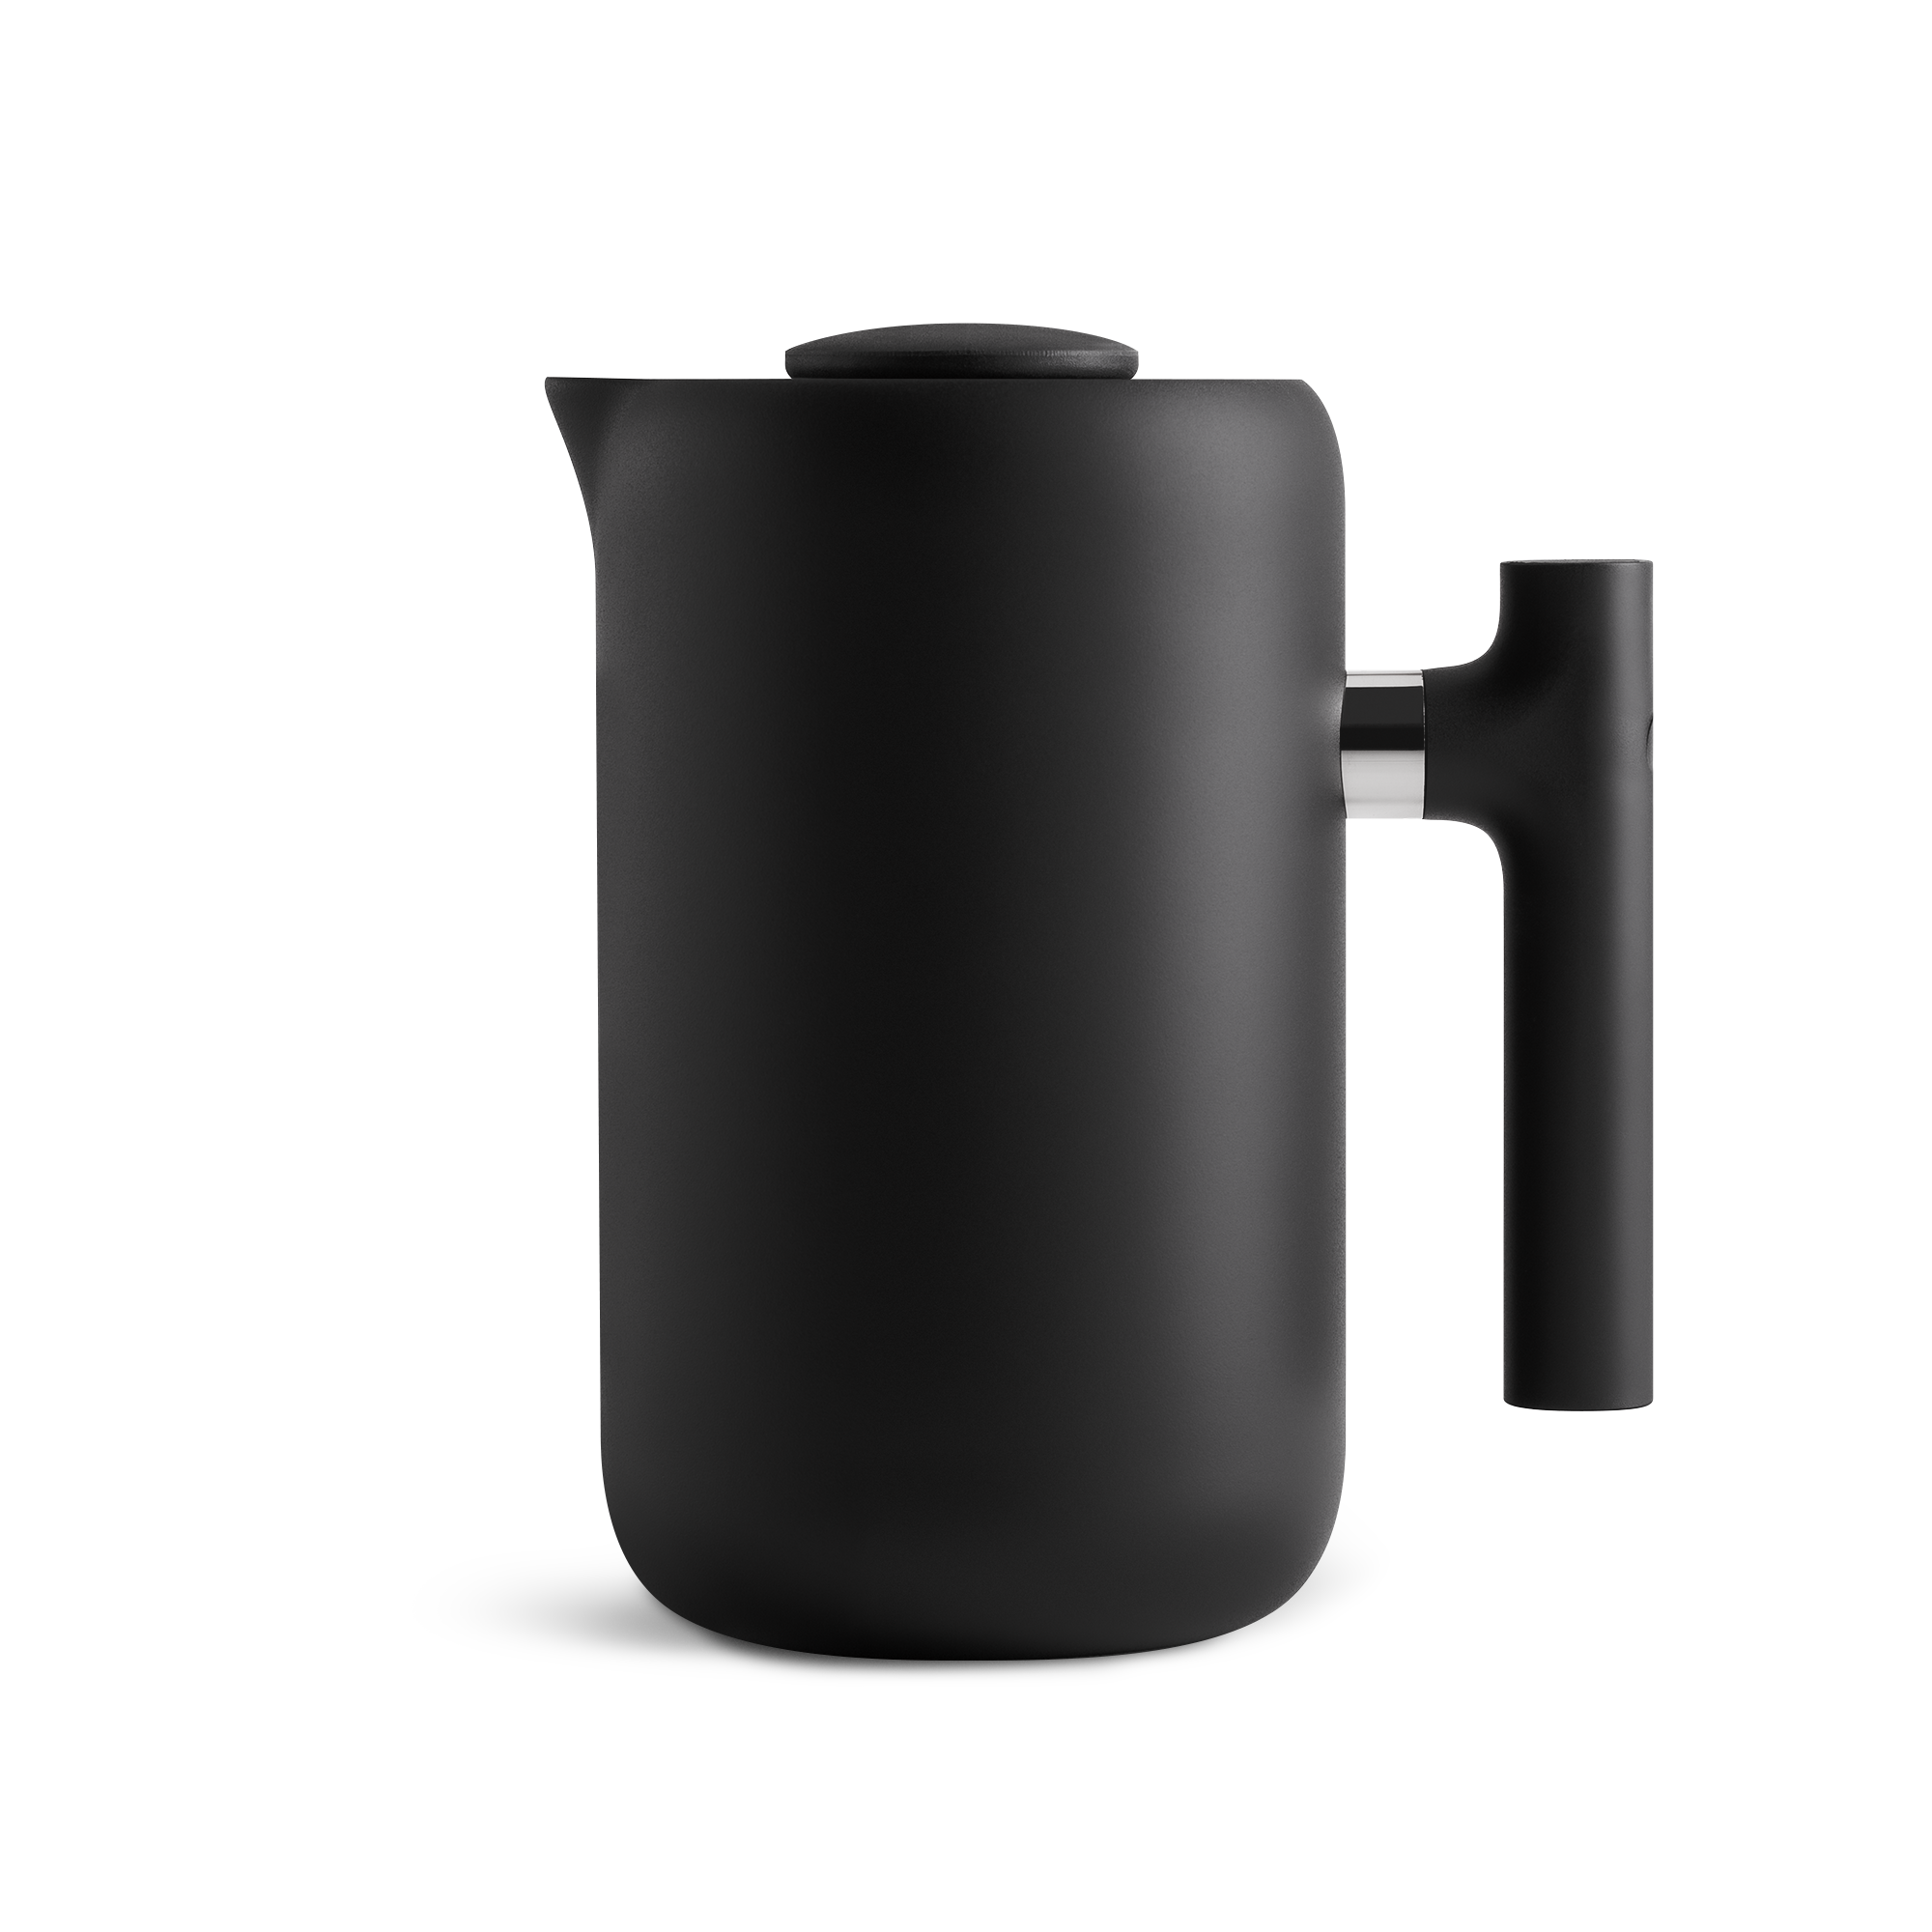 https://cdn.shopify.com/s/files/1/0289/8867/0038/products/Clara-FrenchPress-MB-PureSide.png?v=1629363886&width=2000